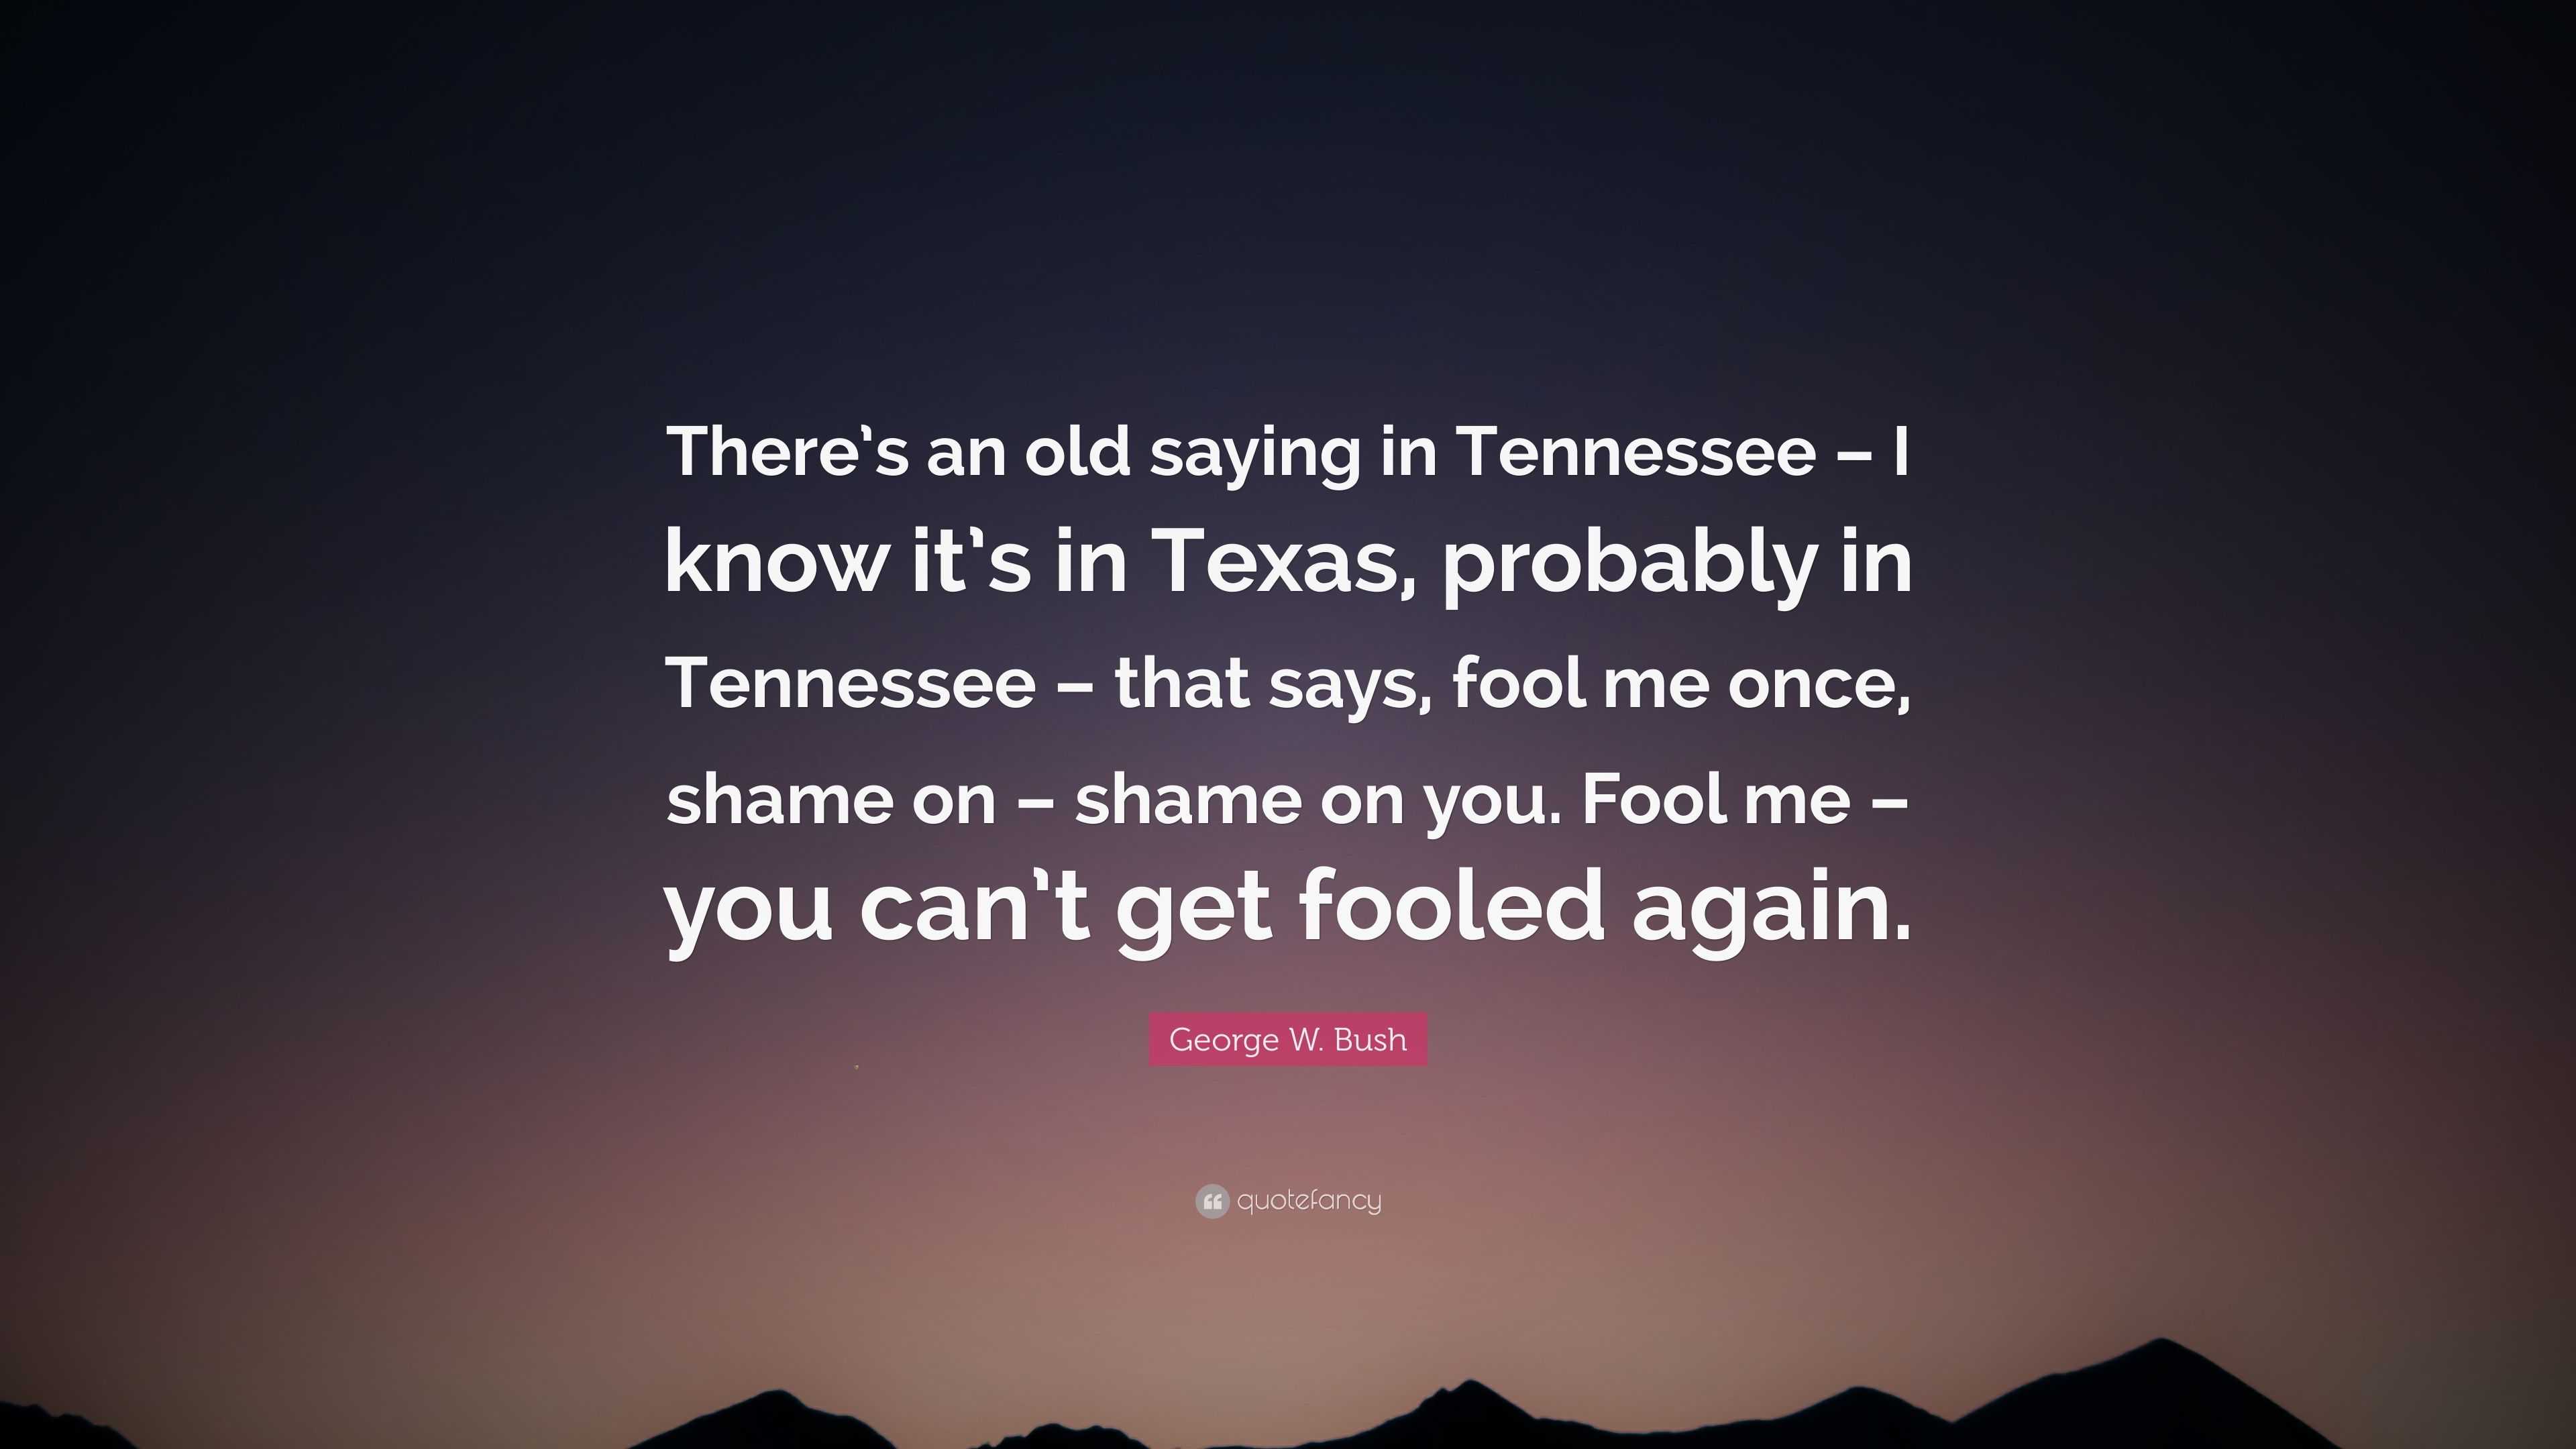 2080385 George W Bush Quote There s an old saying in Tennessee I know it s